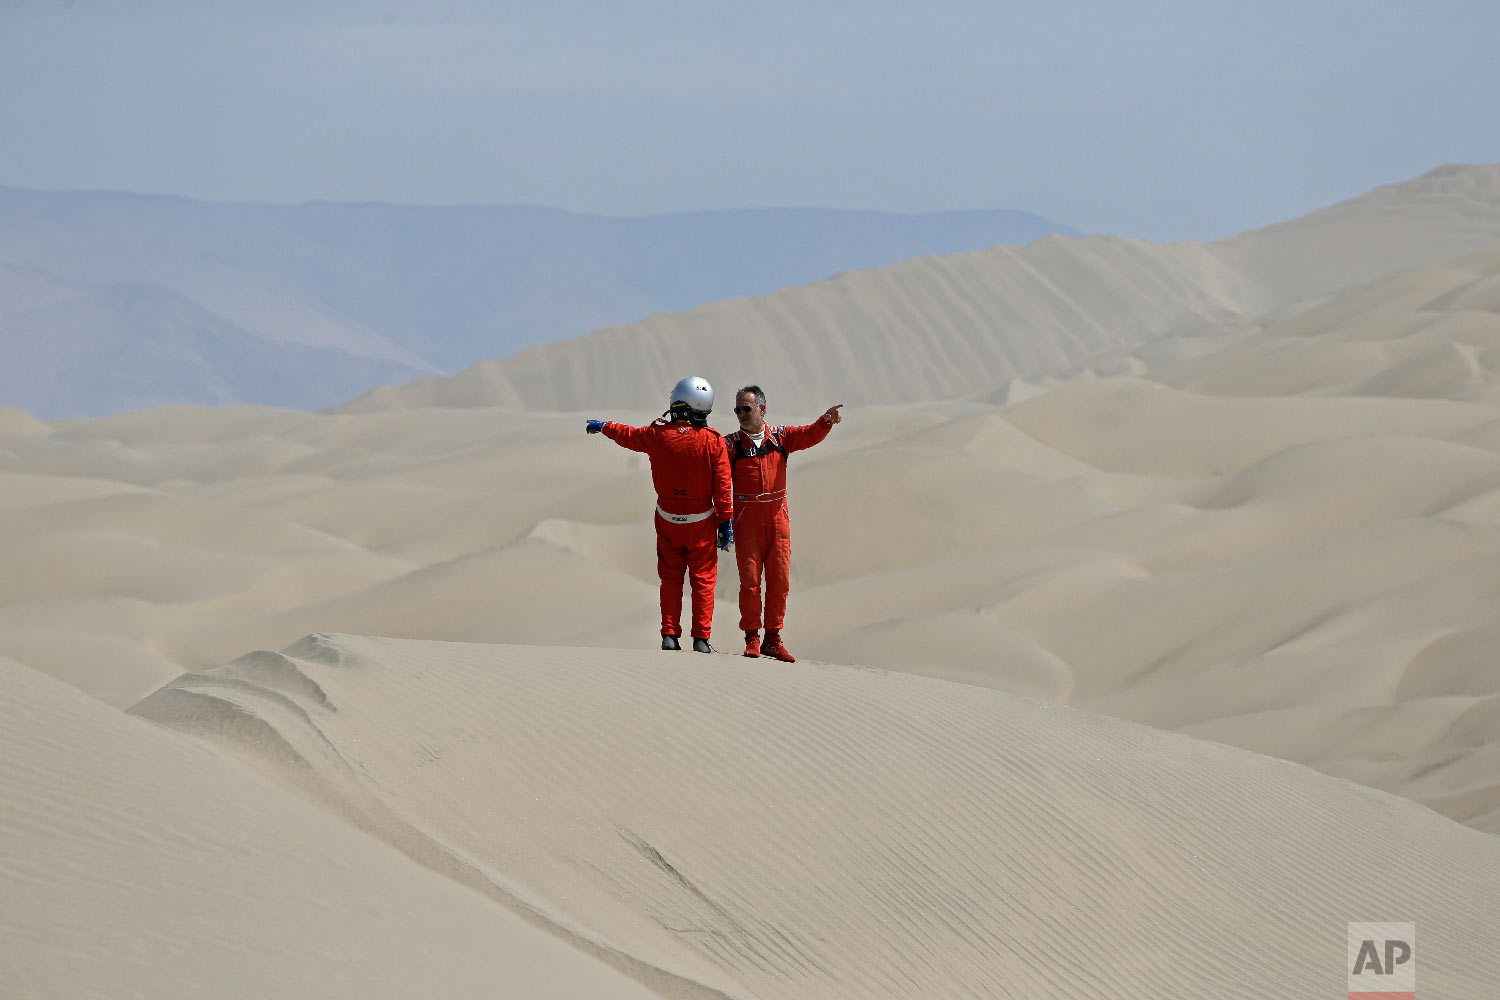  Philippe Raud, of France, right, and Miguel Angel Alvarez Pineda, of Peru, both drivers of Toyota cars, point in opposite directions as they try to determine their way across the dunes during stage 5 of the Dakar Rally between San Juan de Marcona an